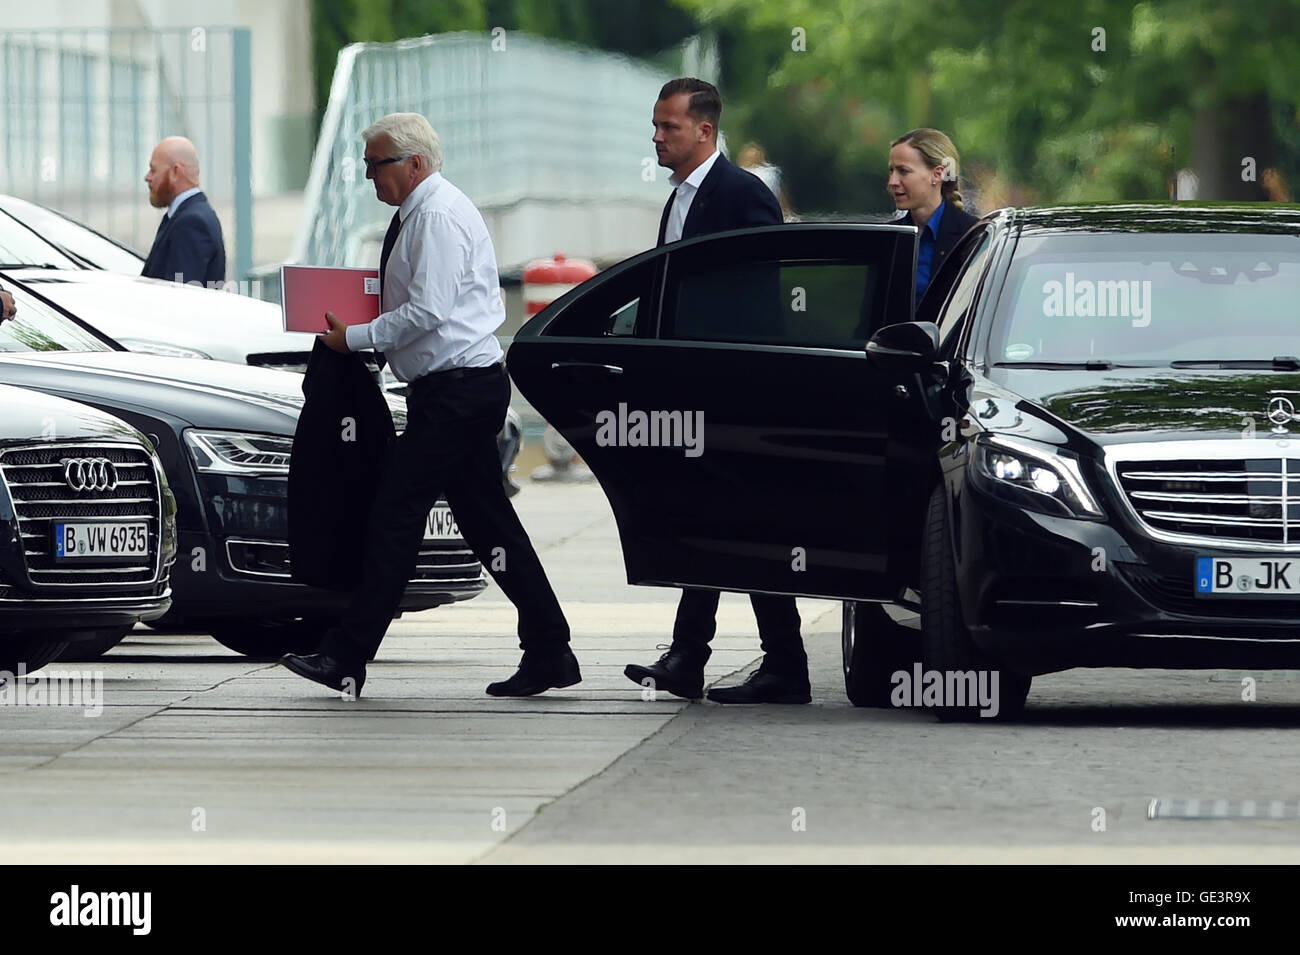 Berlin, Germany. 23rd July, 2016. Foreign Minister Frank-Walter Steinmeier (SPD) arrives for emergency talks on the security situation at the federal chancellery in Berlin, Germany, 23 July 2016. After an attack in Munich interior minister de Maizière (CDU) has ordered flags at half-mast throughout Germany. An 18-year-old German-Iranian had killed nine people and himself in Munich on Friday evening. The background and motive of the attack remain unclear. PHOTO: Maurizio Gambarini/dpa/Alamy Live News Stock Photo